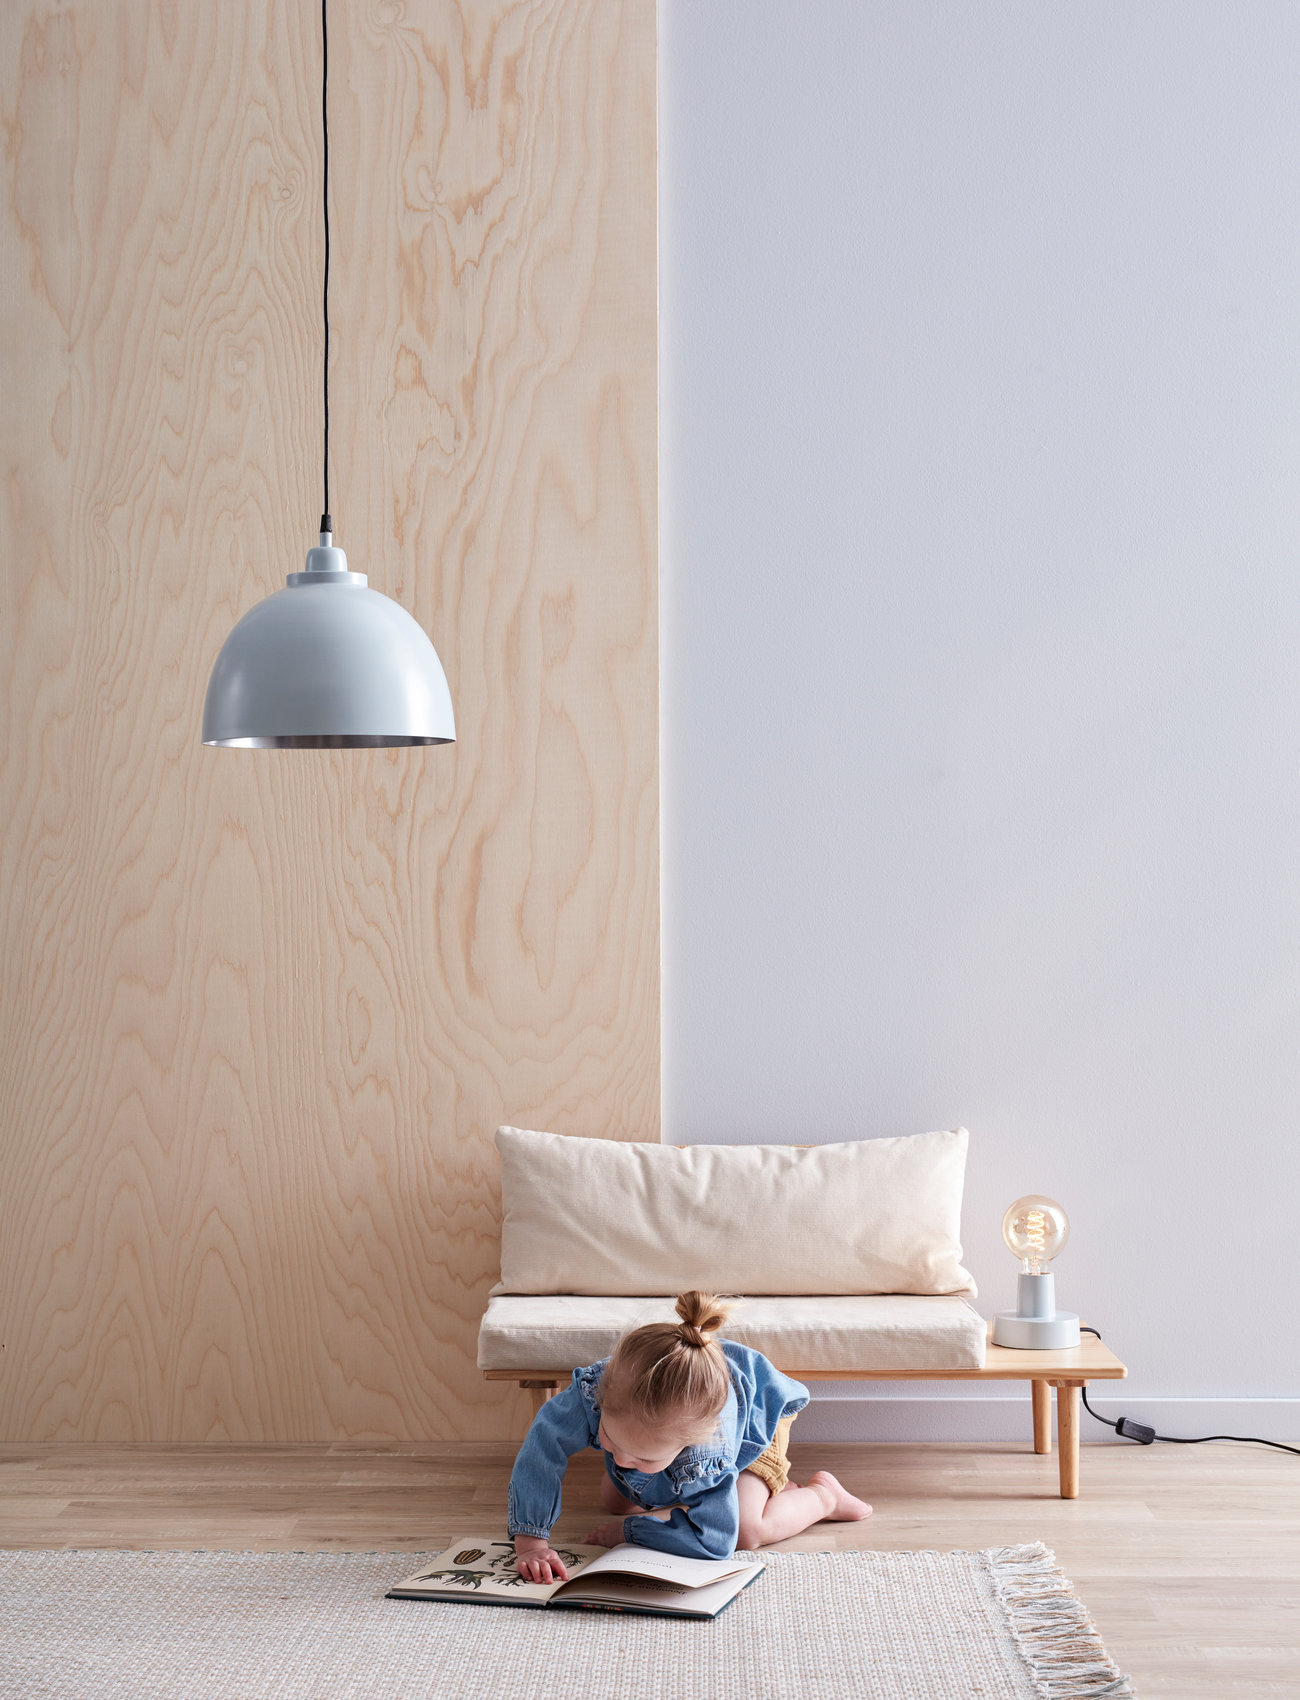 Kid's Concept - Ceiling lamp metal blue/grey - beleuchtung - blue/grey - 1